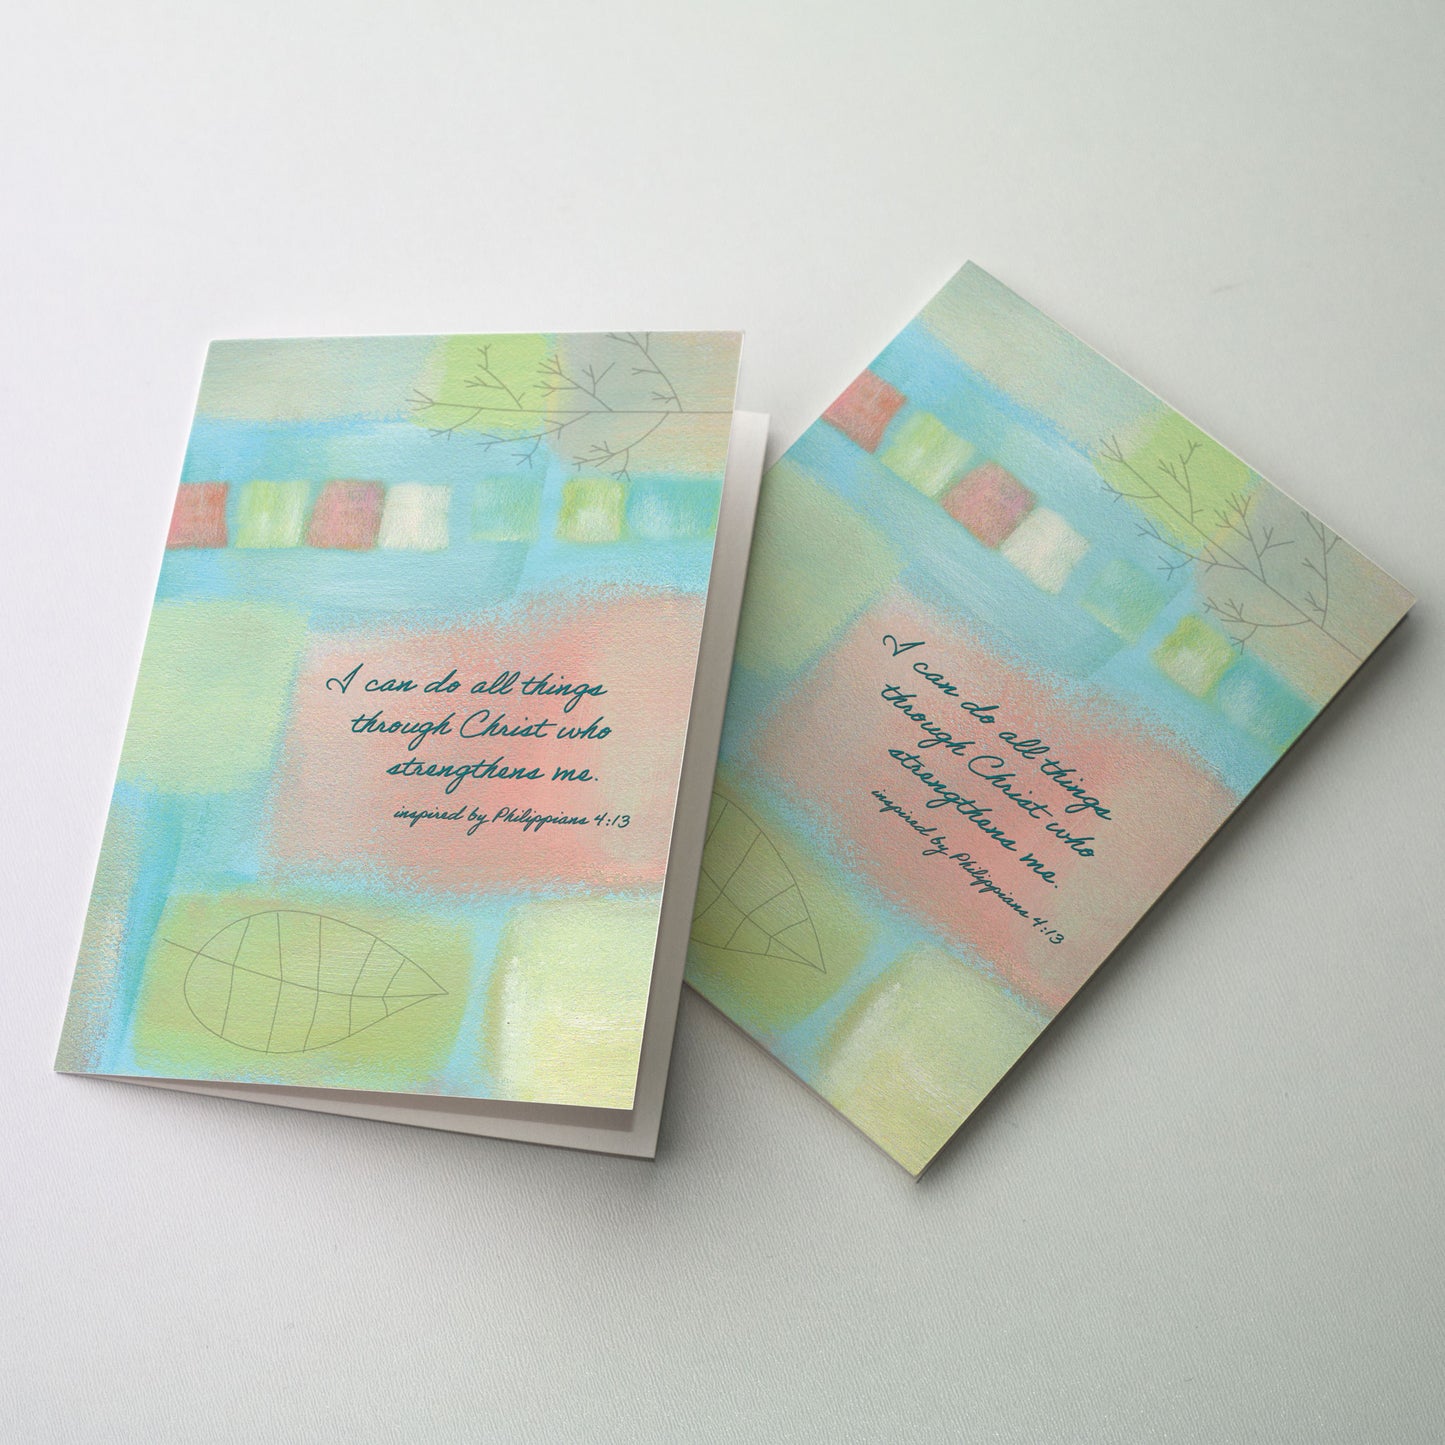 I Can Do All Things Through Christ - Affirmation Card